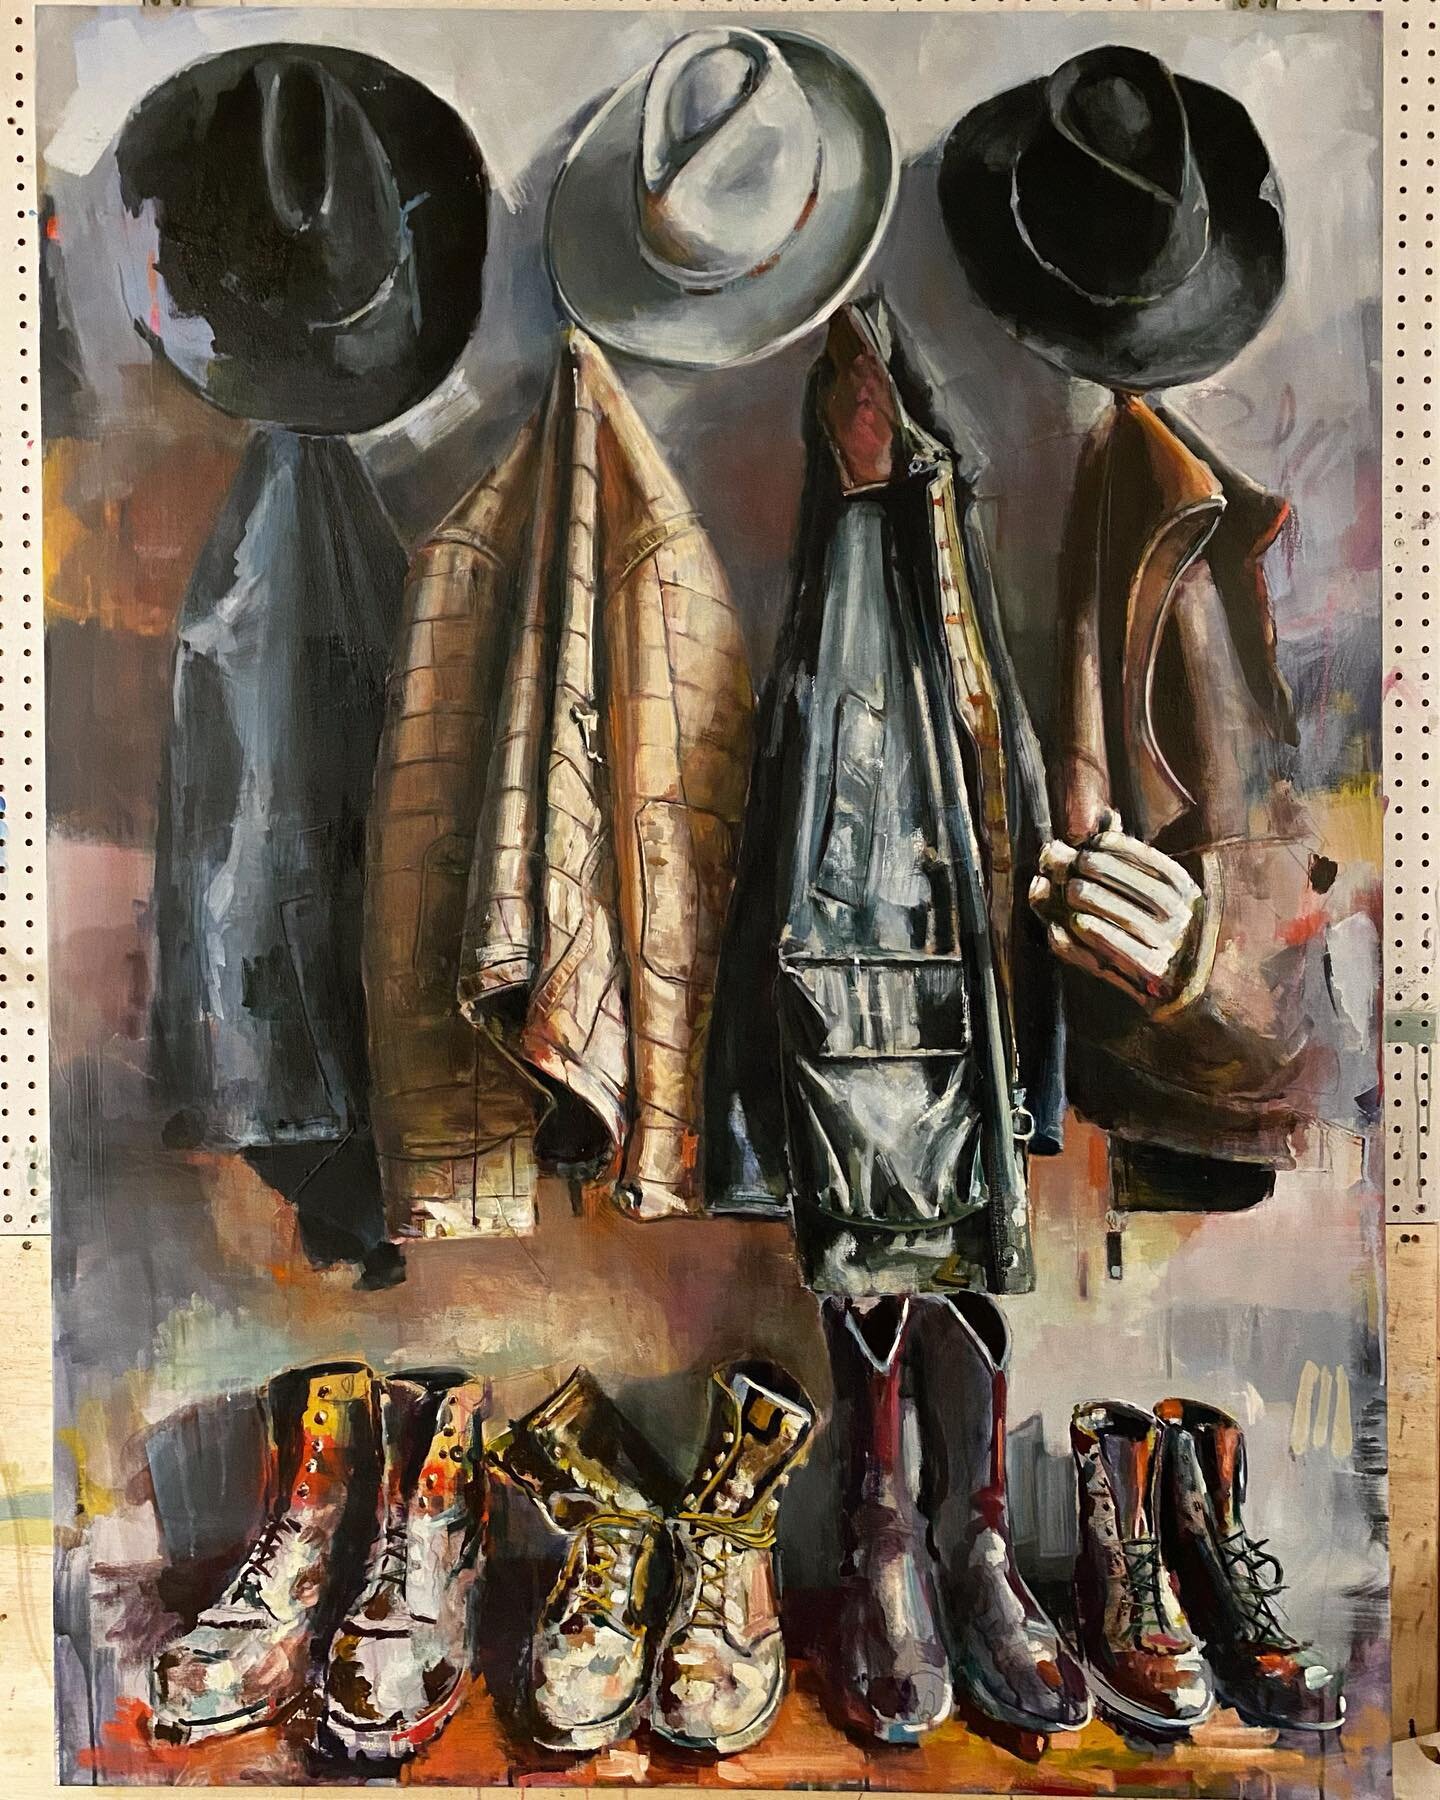 Still images of ReadyRoom - oil on canvas with collage.  This piece will be on view with the rest of the Miners series next month. Details to follow 🤘 stay tuned. 
.
.
.
.
.
#tuckereason #artshow #artgallery #artstudio #aspen #stetson #dannerboots #